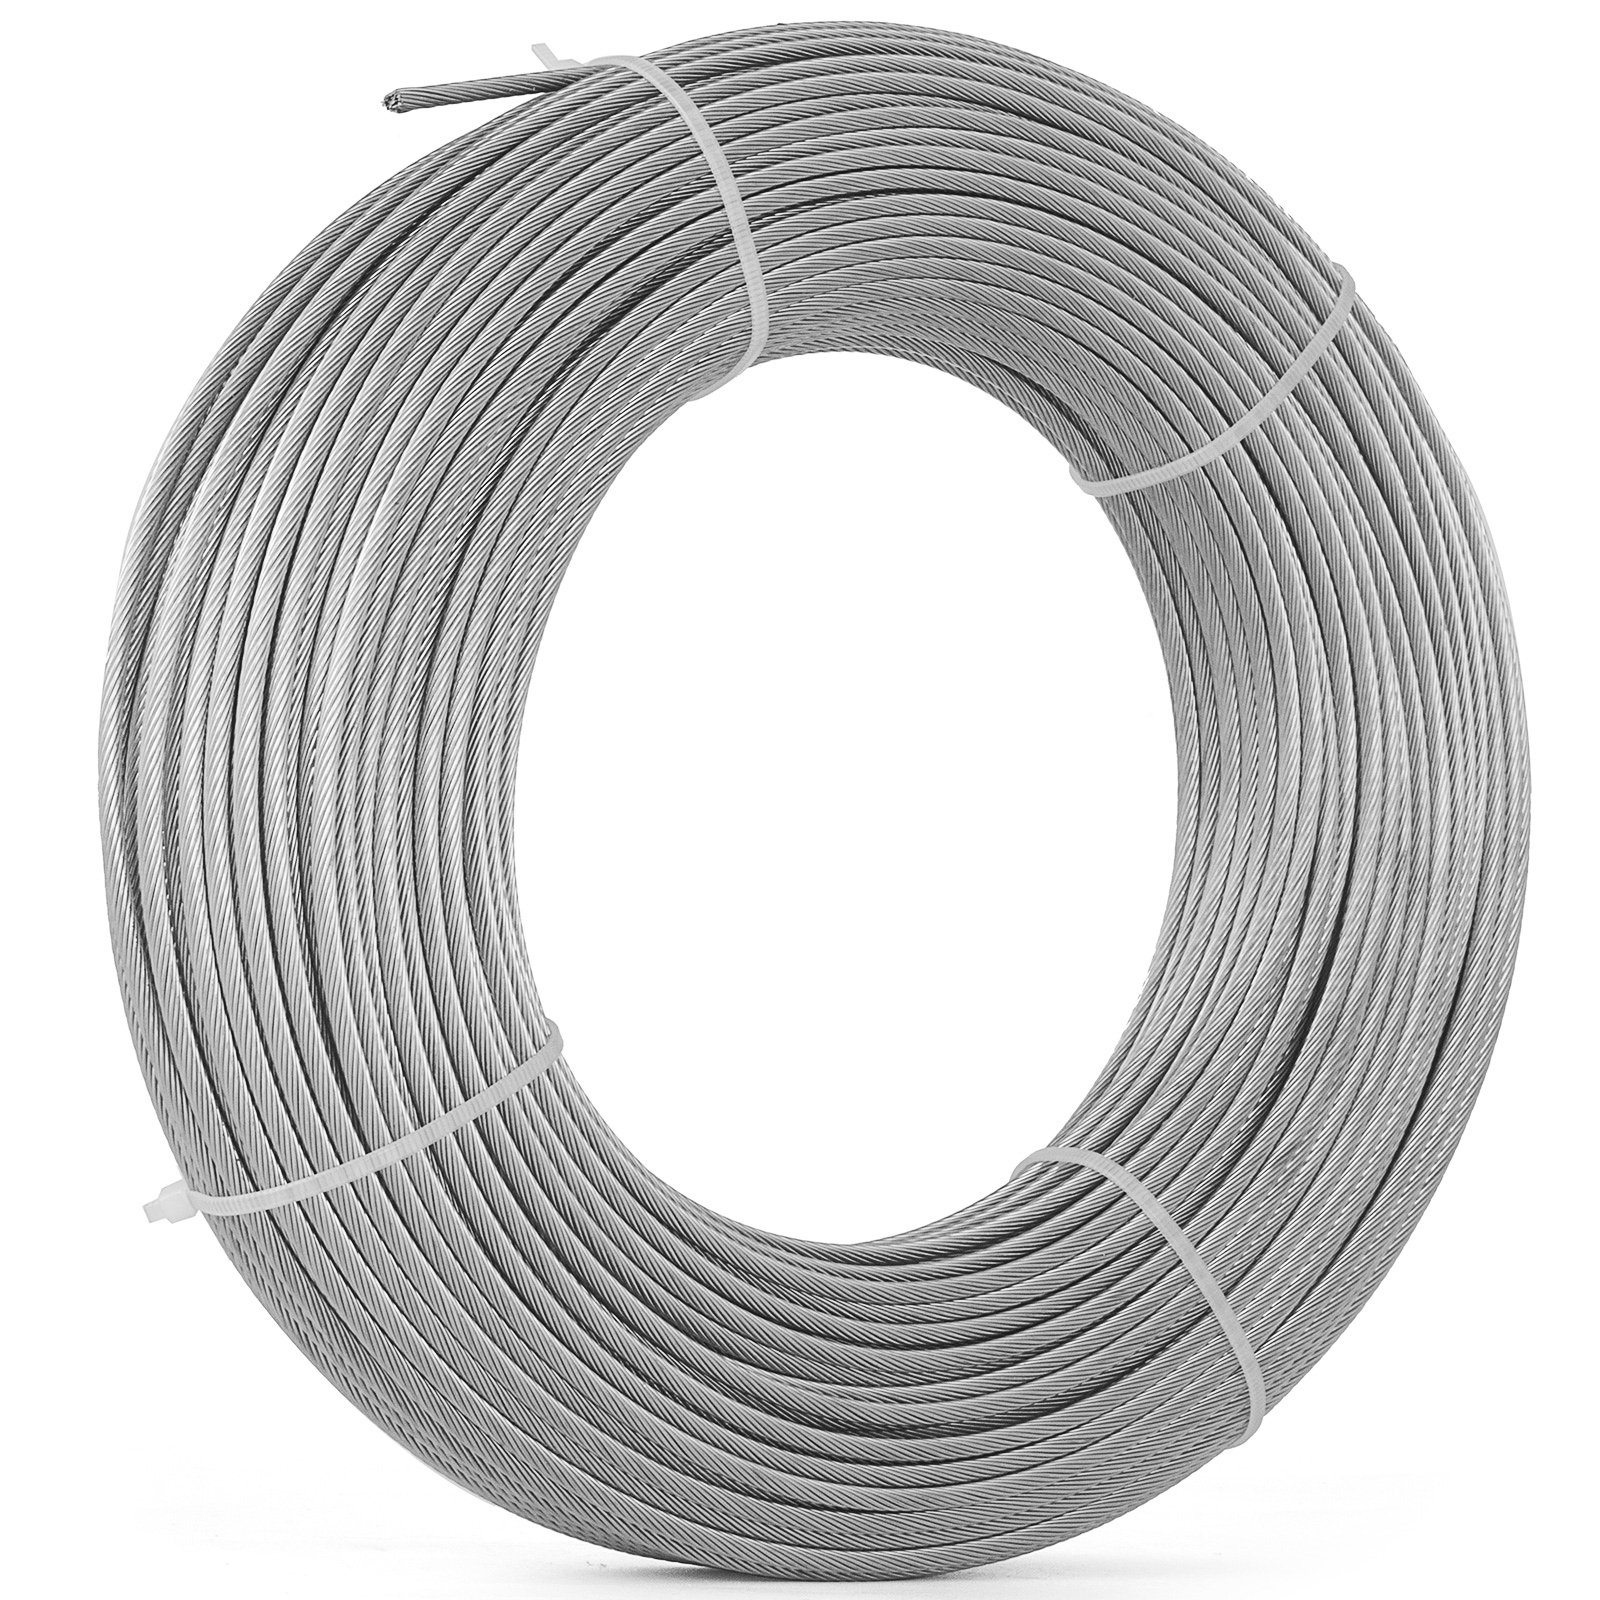 Stainless Steel Type 316 Wire Rope 7x7 100-1000FT Lifting Business Stainless